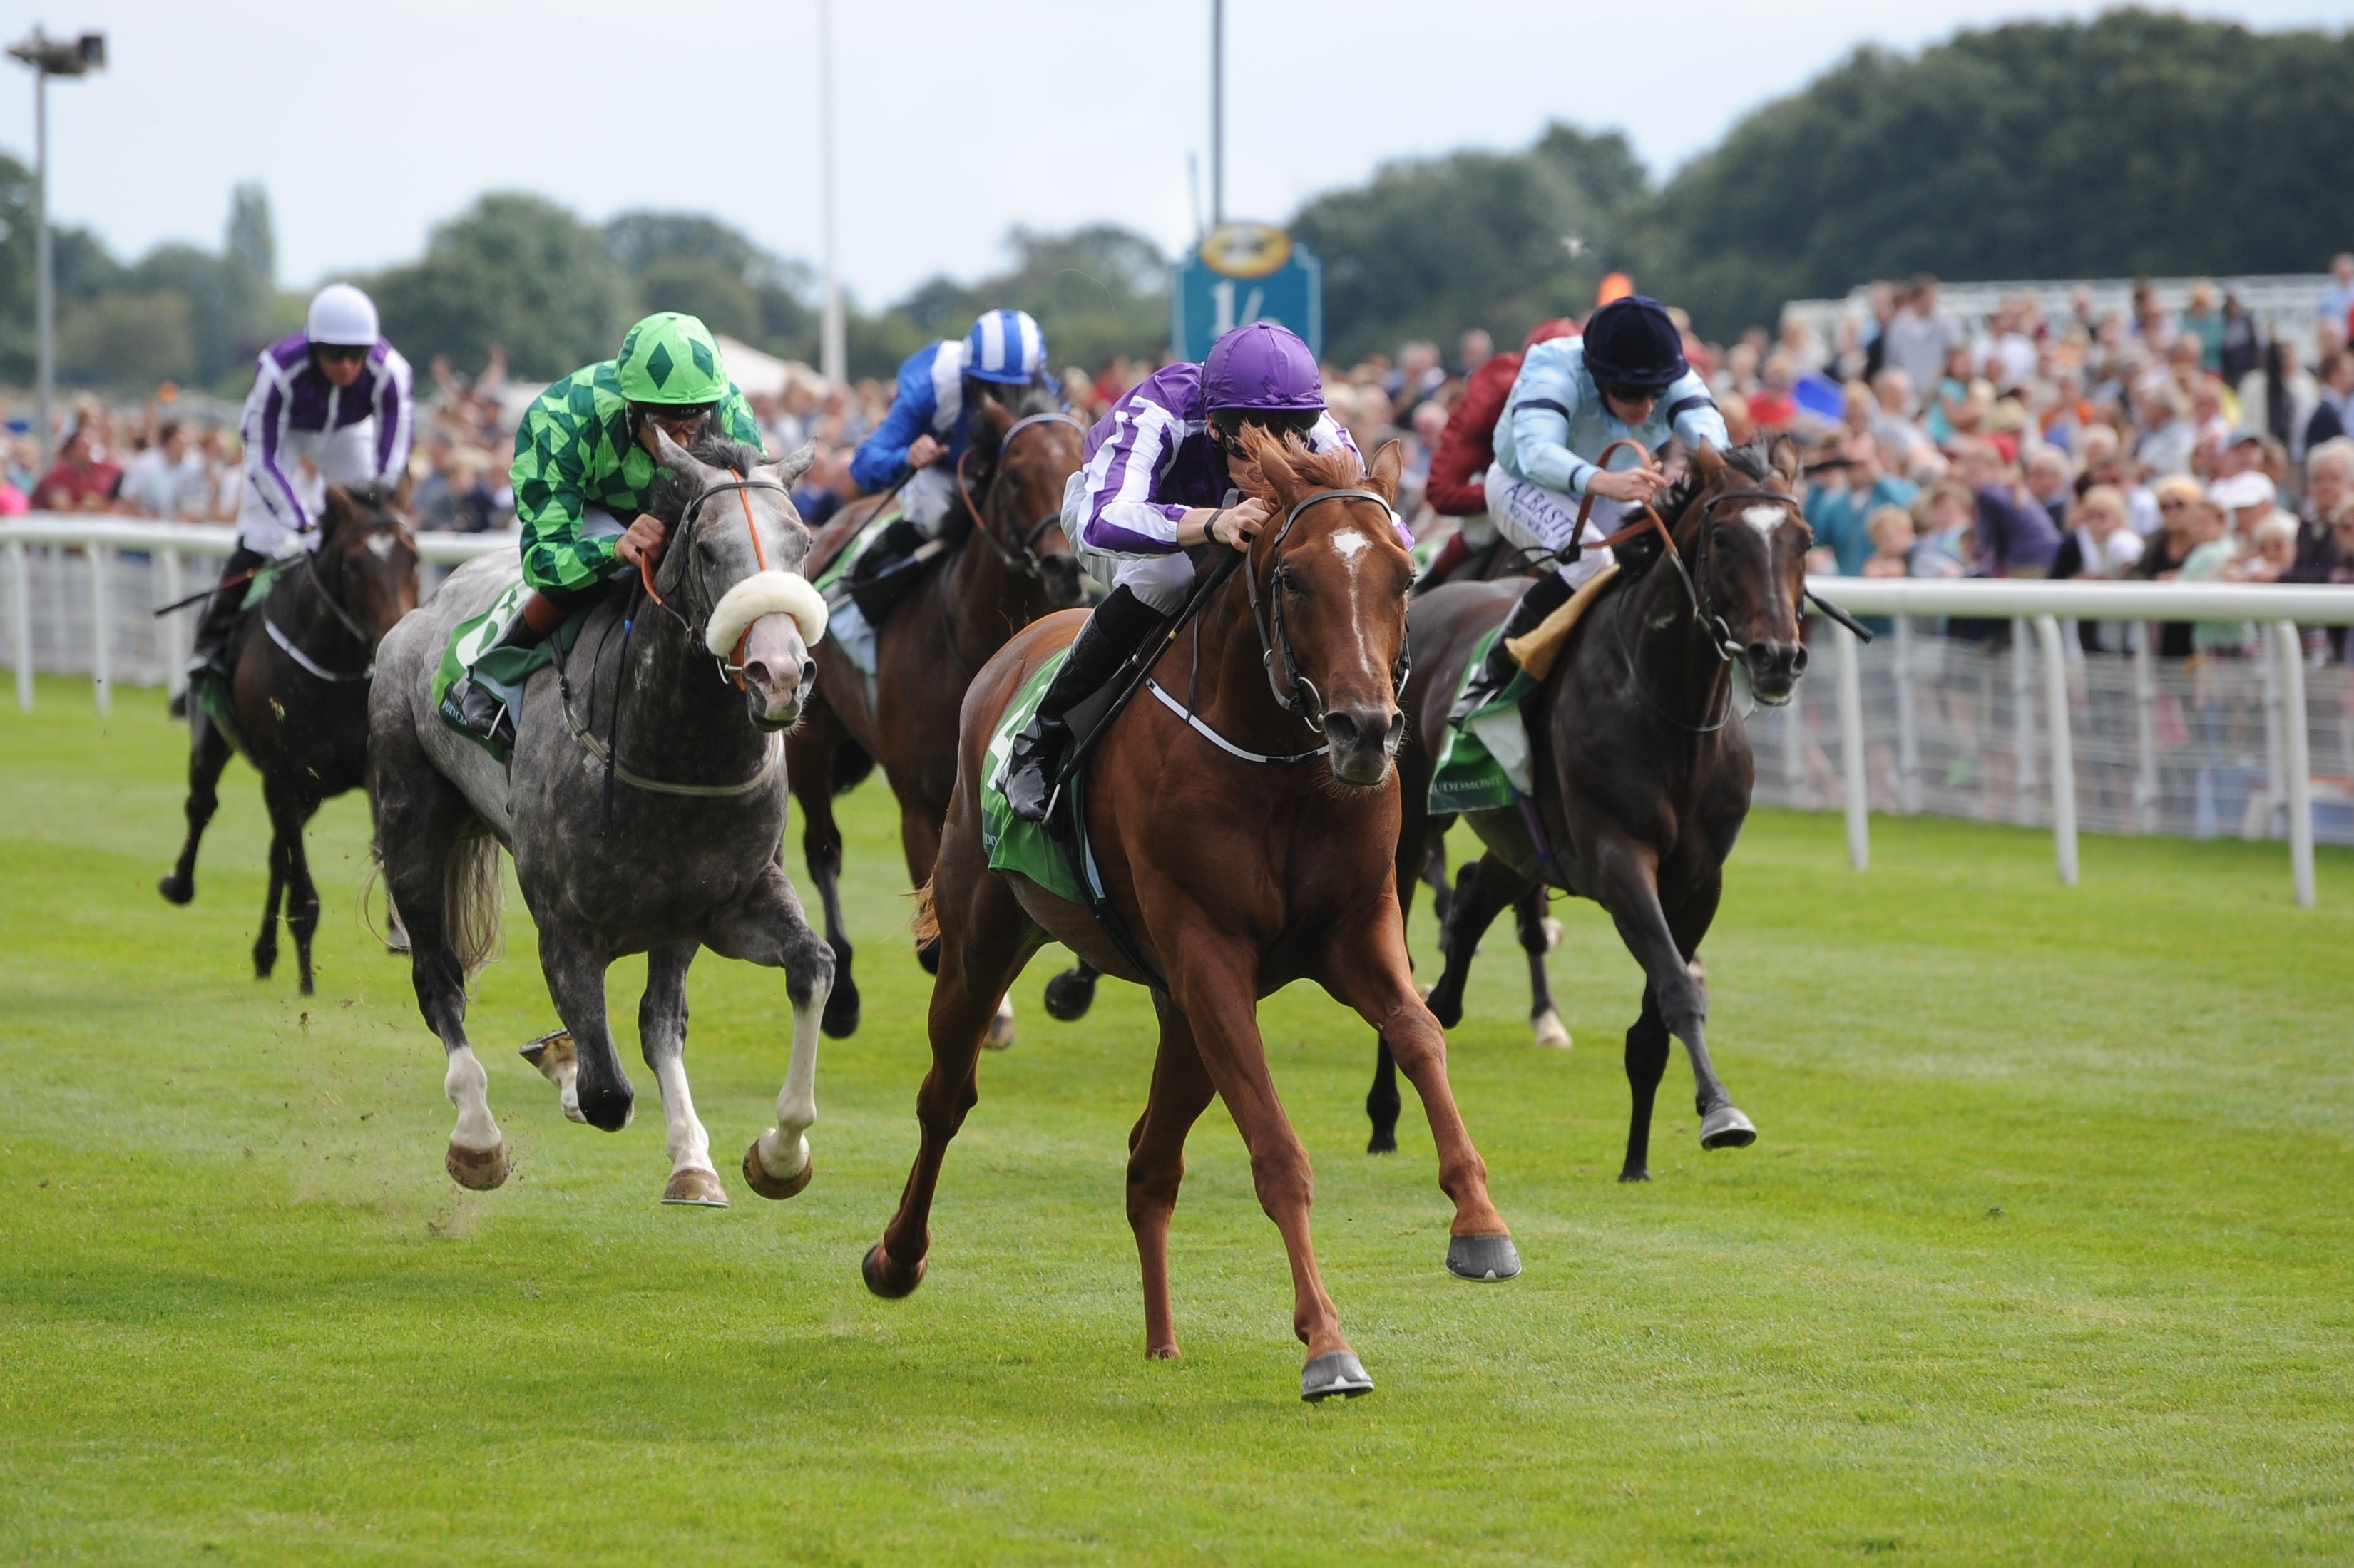 Annual Racecourse Attendance Figures Hold Firm with 4.83m Racegoers